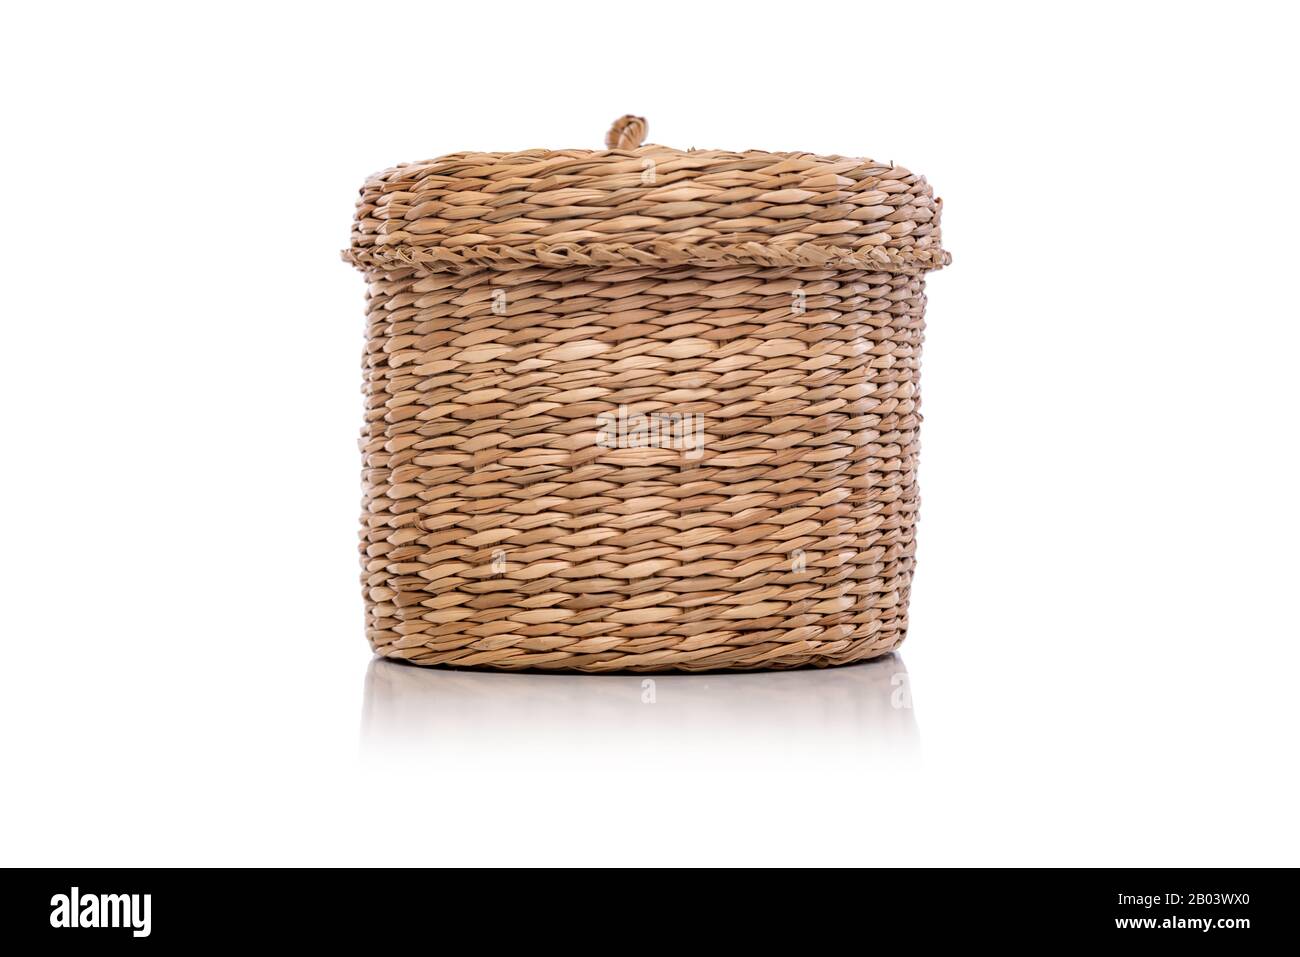 Wicker basket is isolated on a white background. Stock Photo